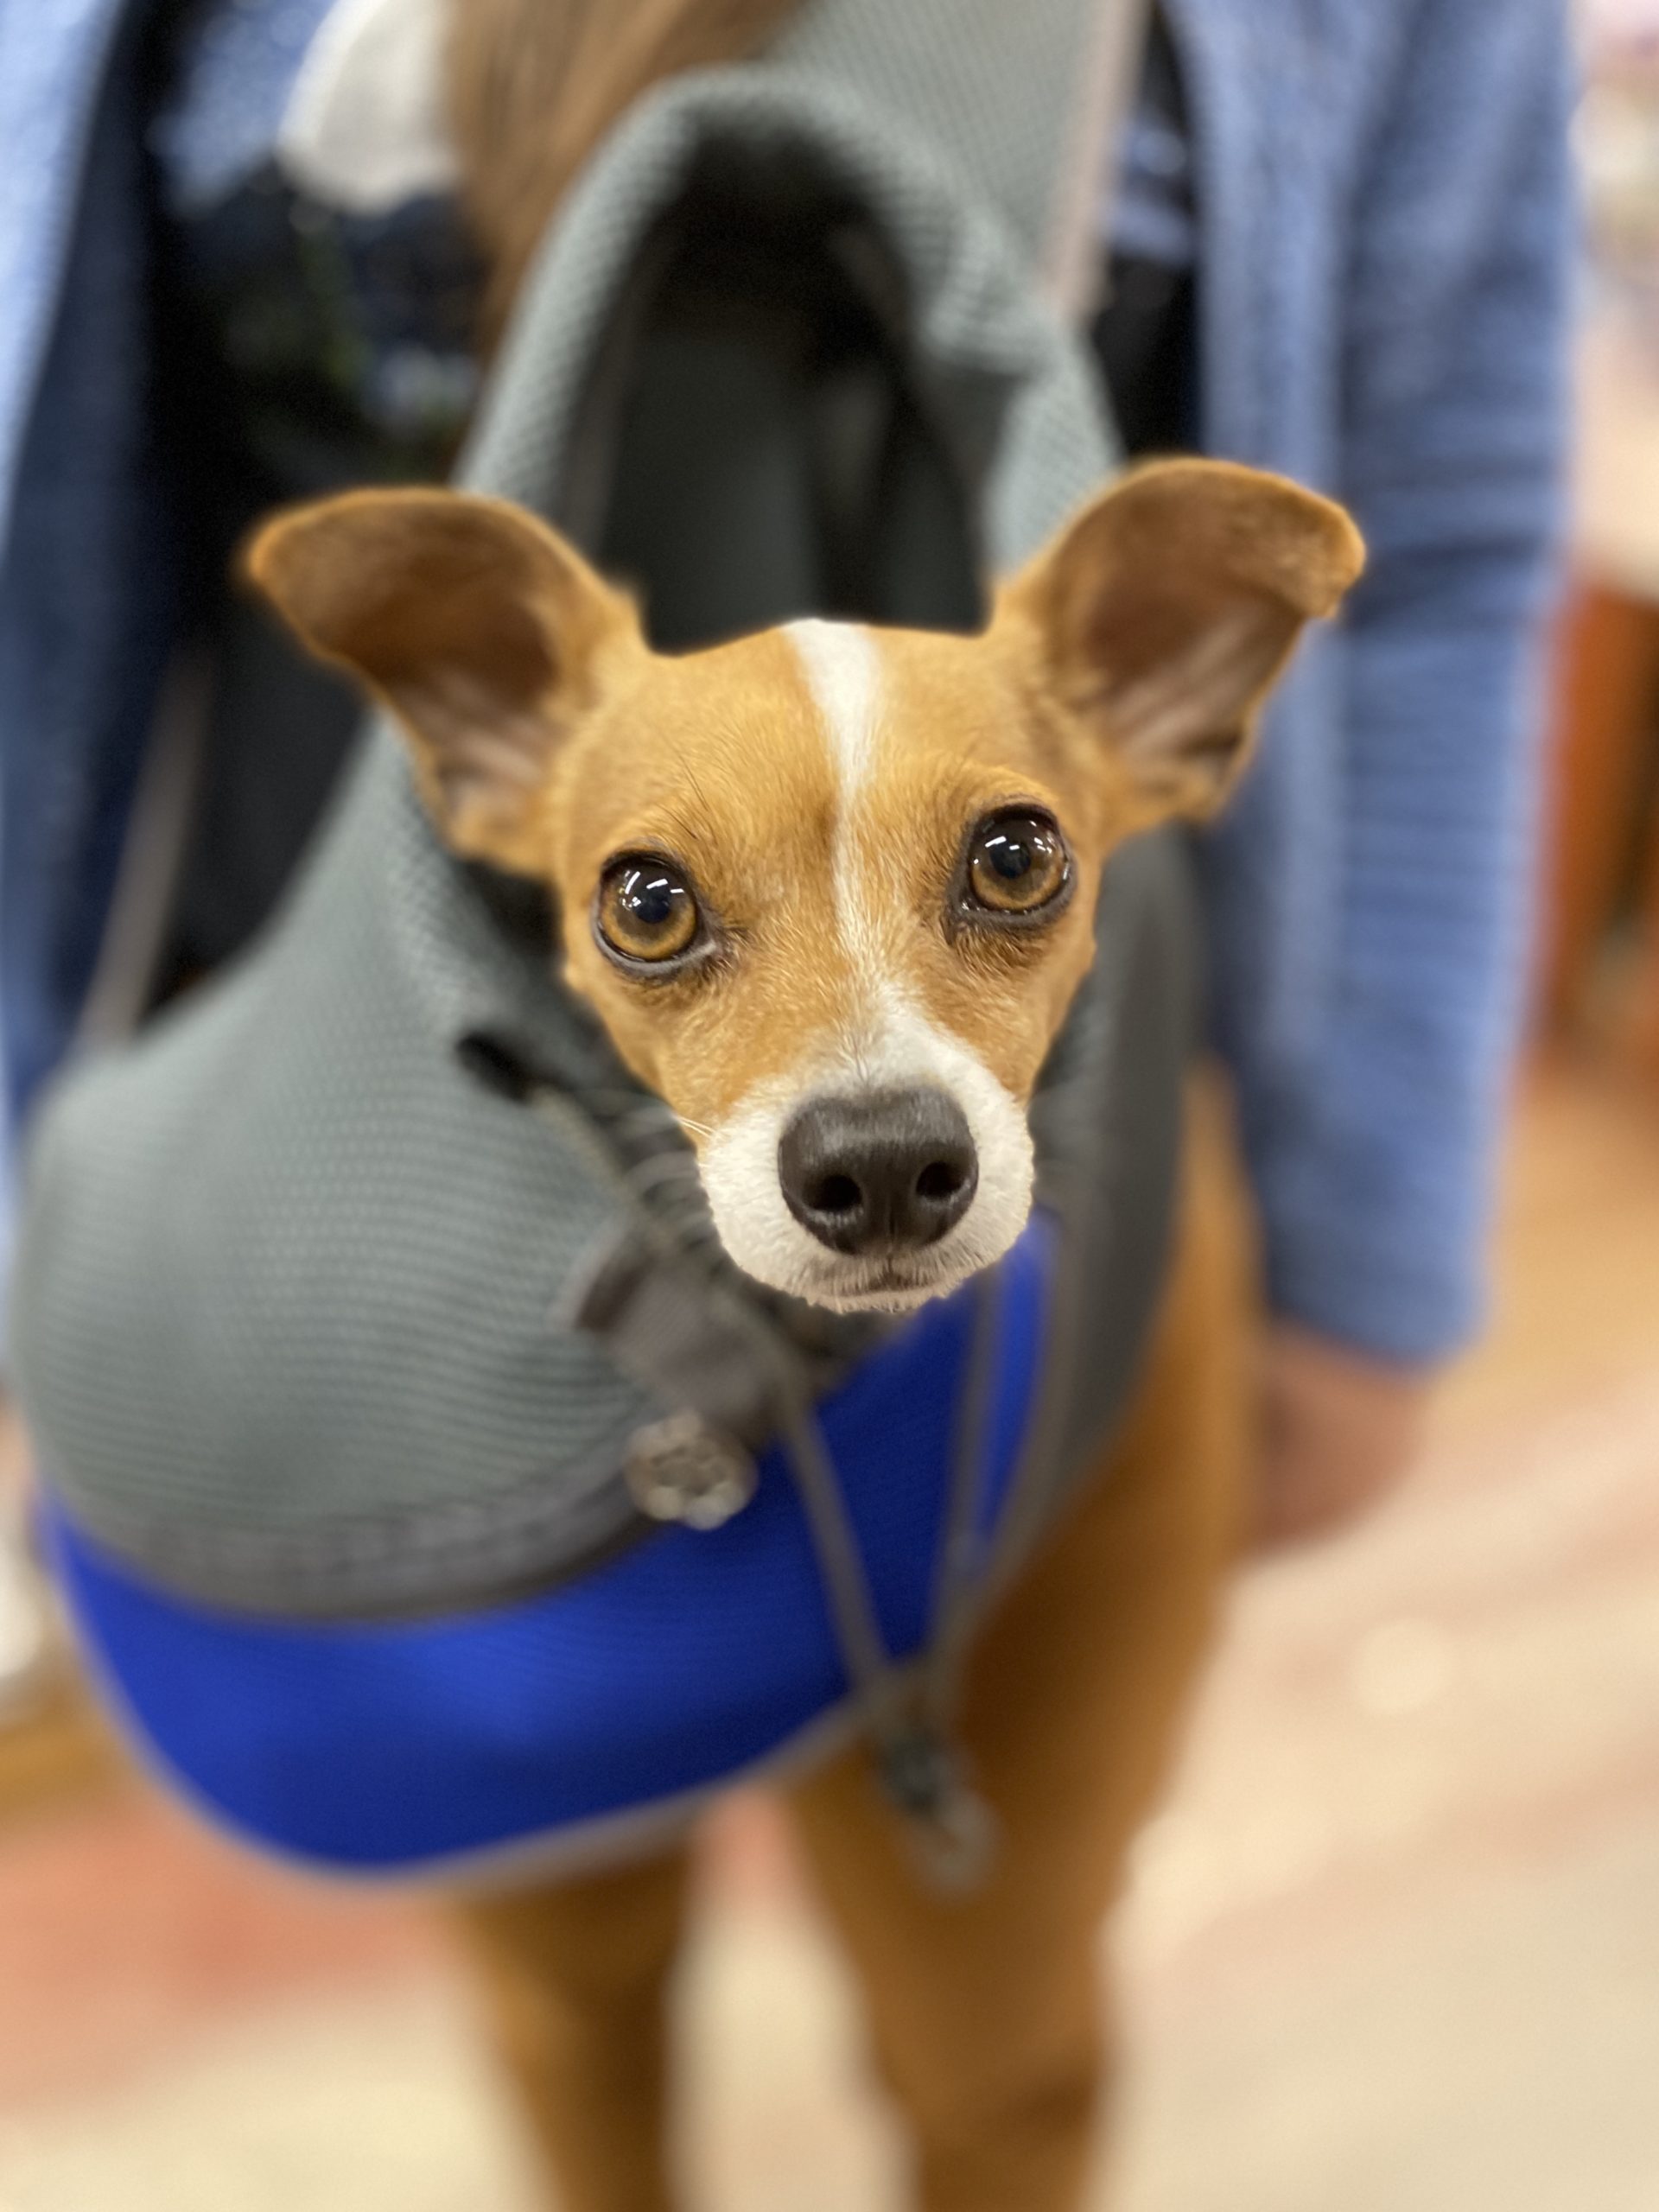 Italian Greyhound Chihuahua Mix With Ridiculous Ears Peeking Out Of A Bag